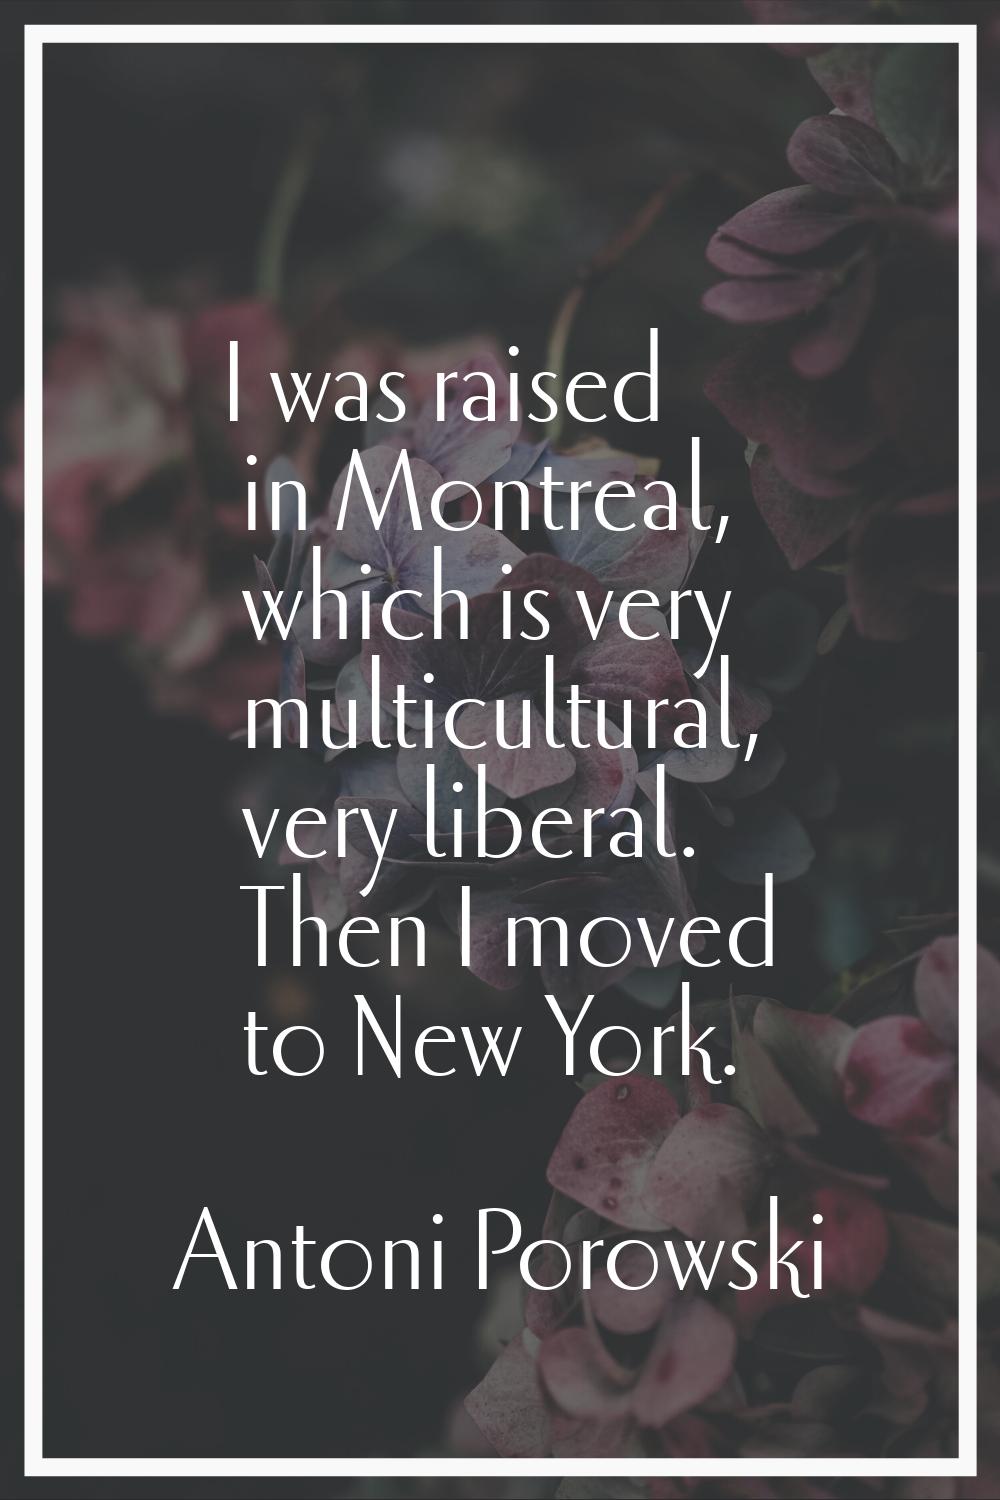 I was raised in Montreal, which is very multicultural, very liberal. Then I moved to New York.